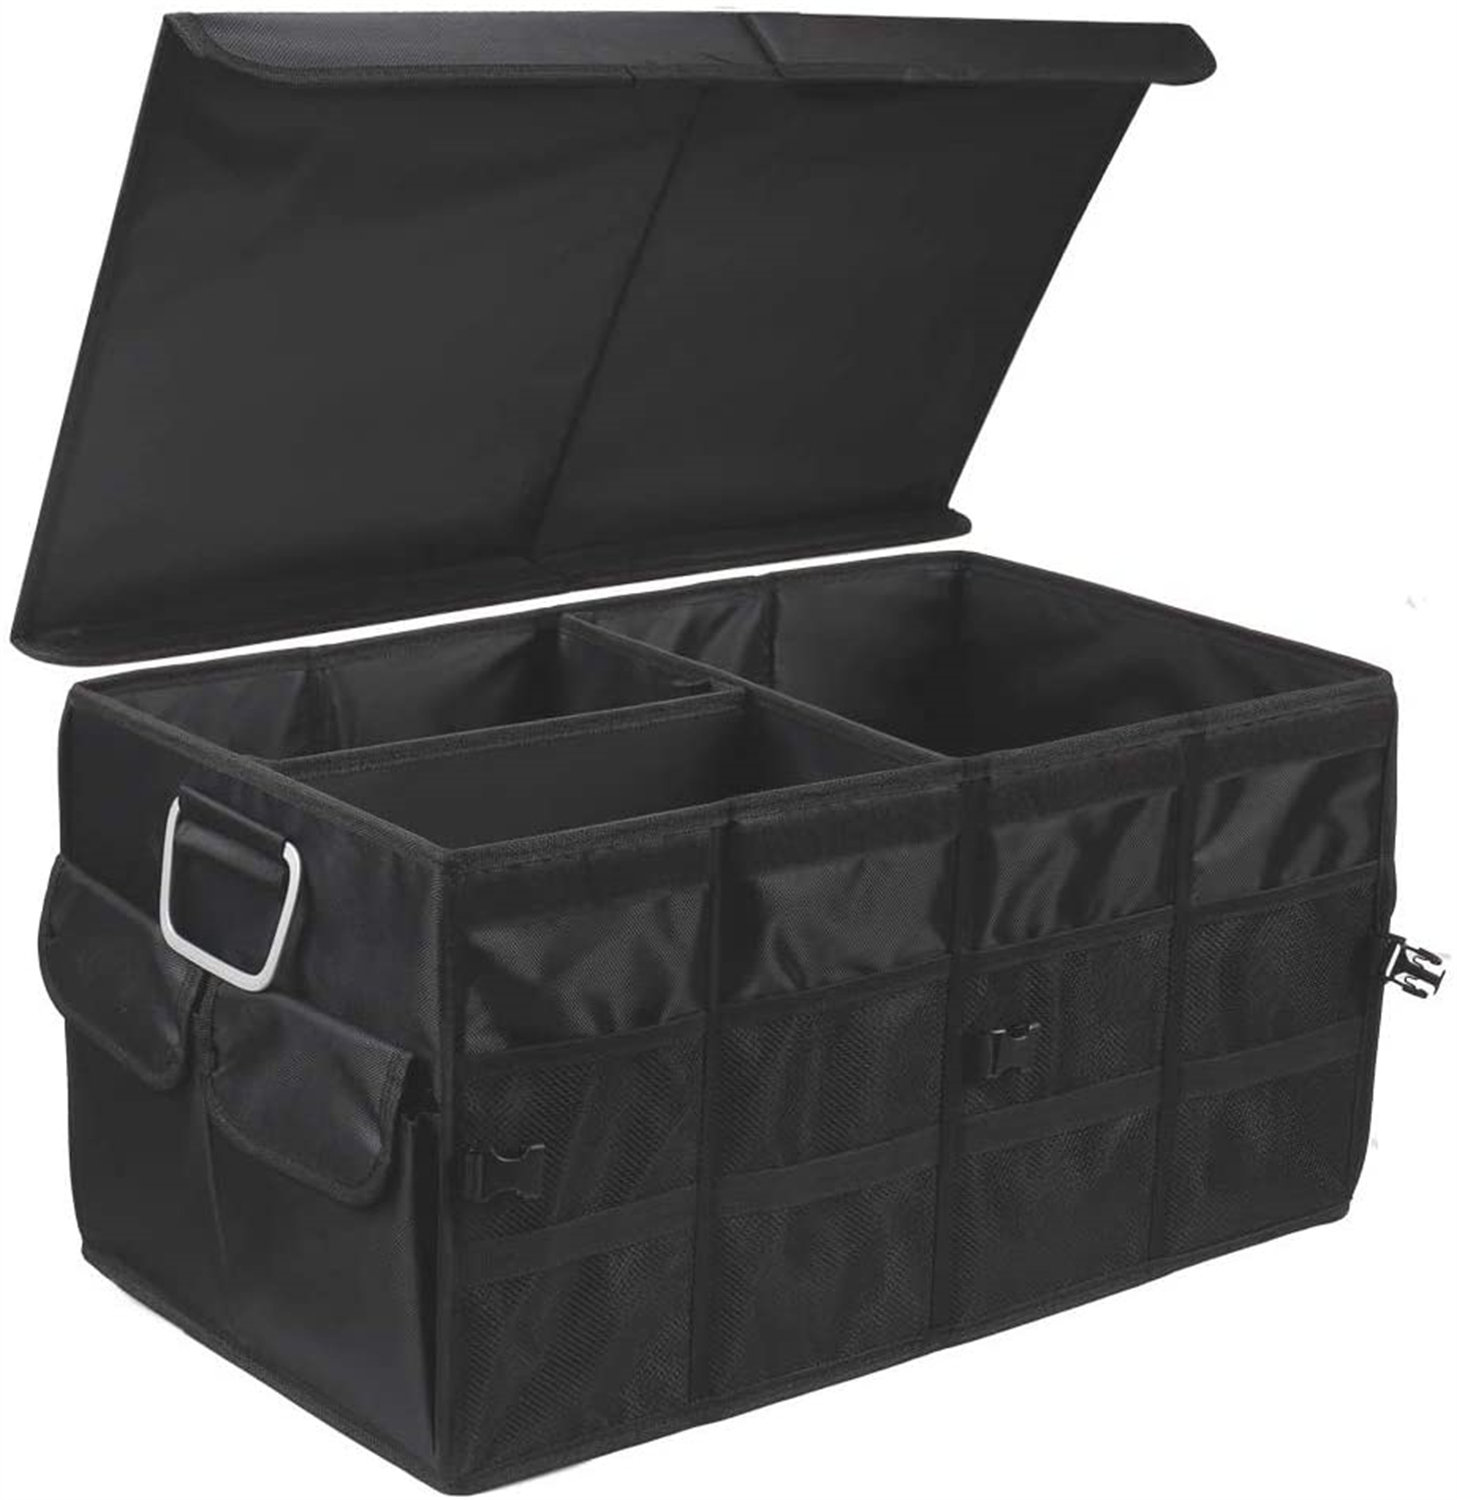 Waterproof Leather Car Trunk Storage Box High-quality Organizer with Partition